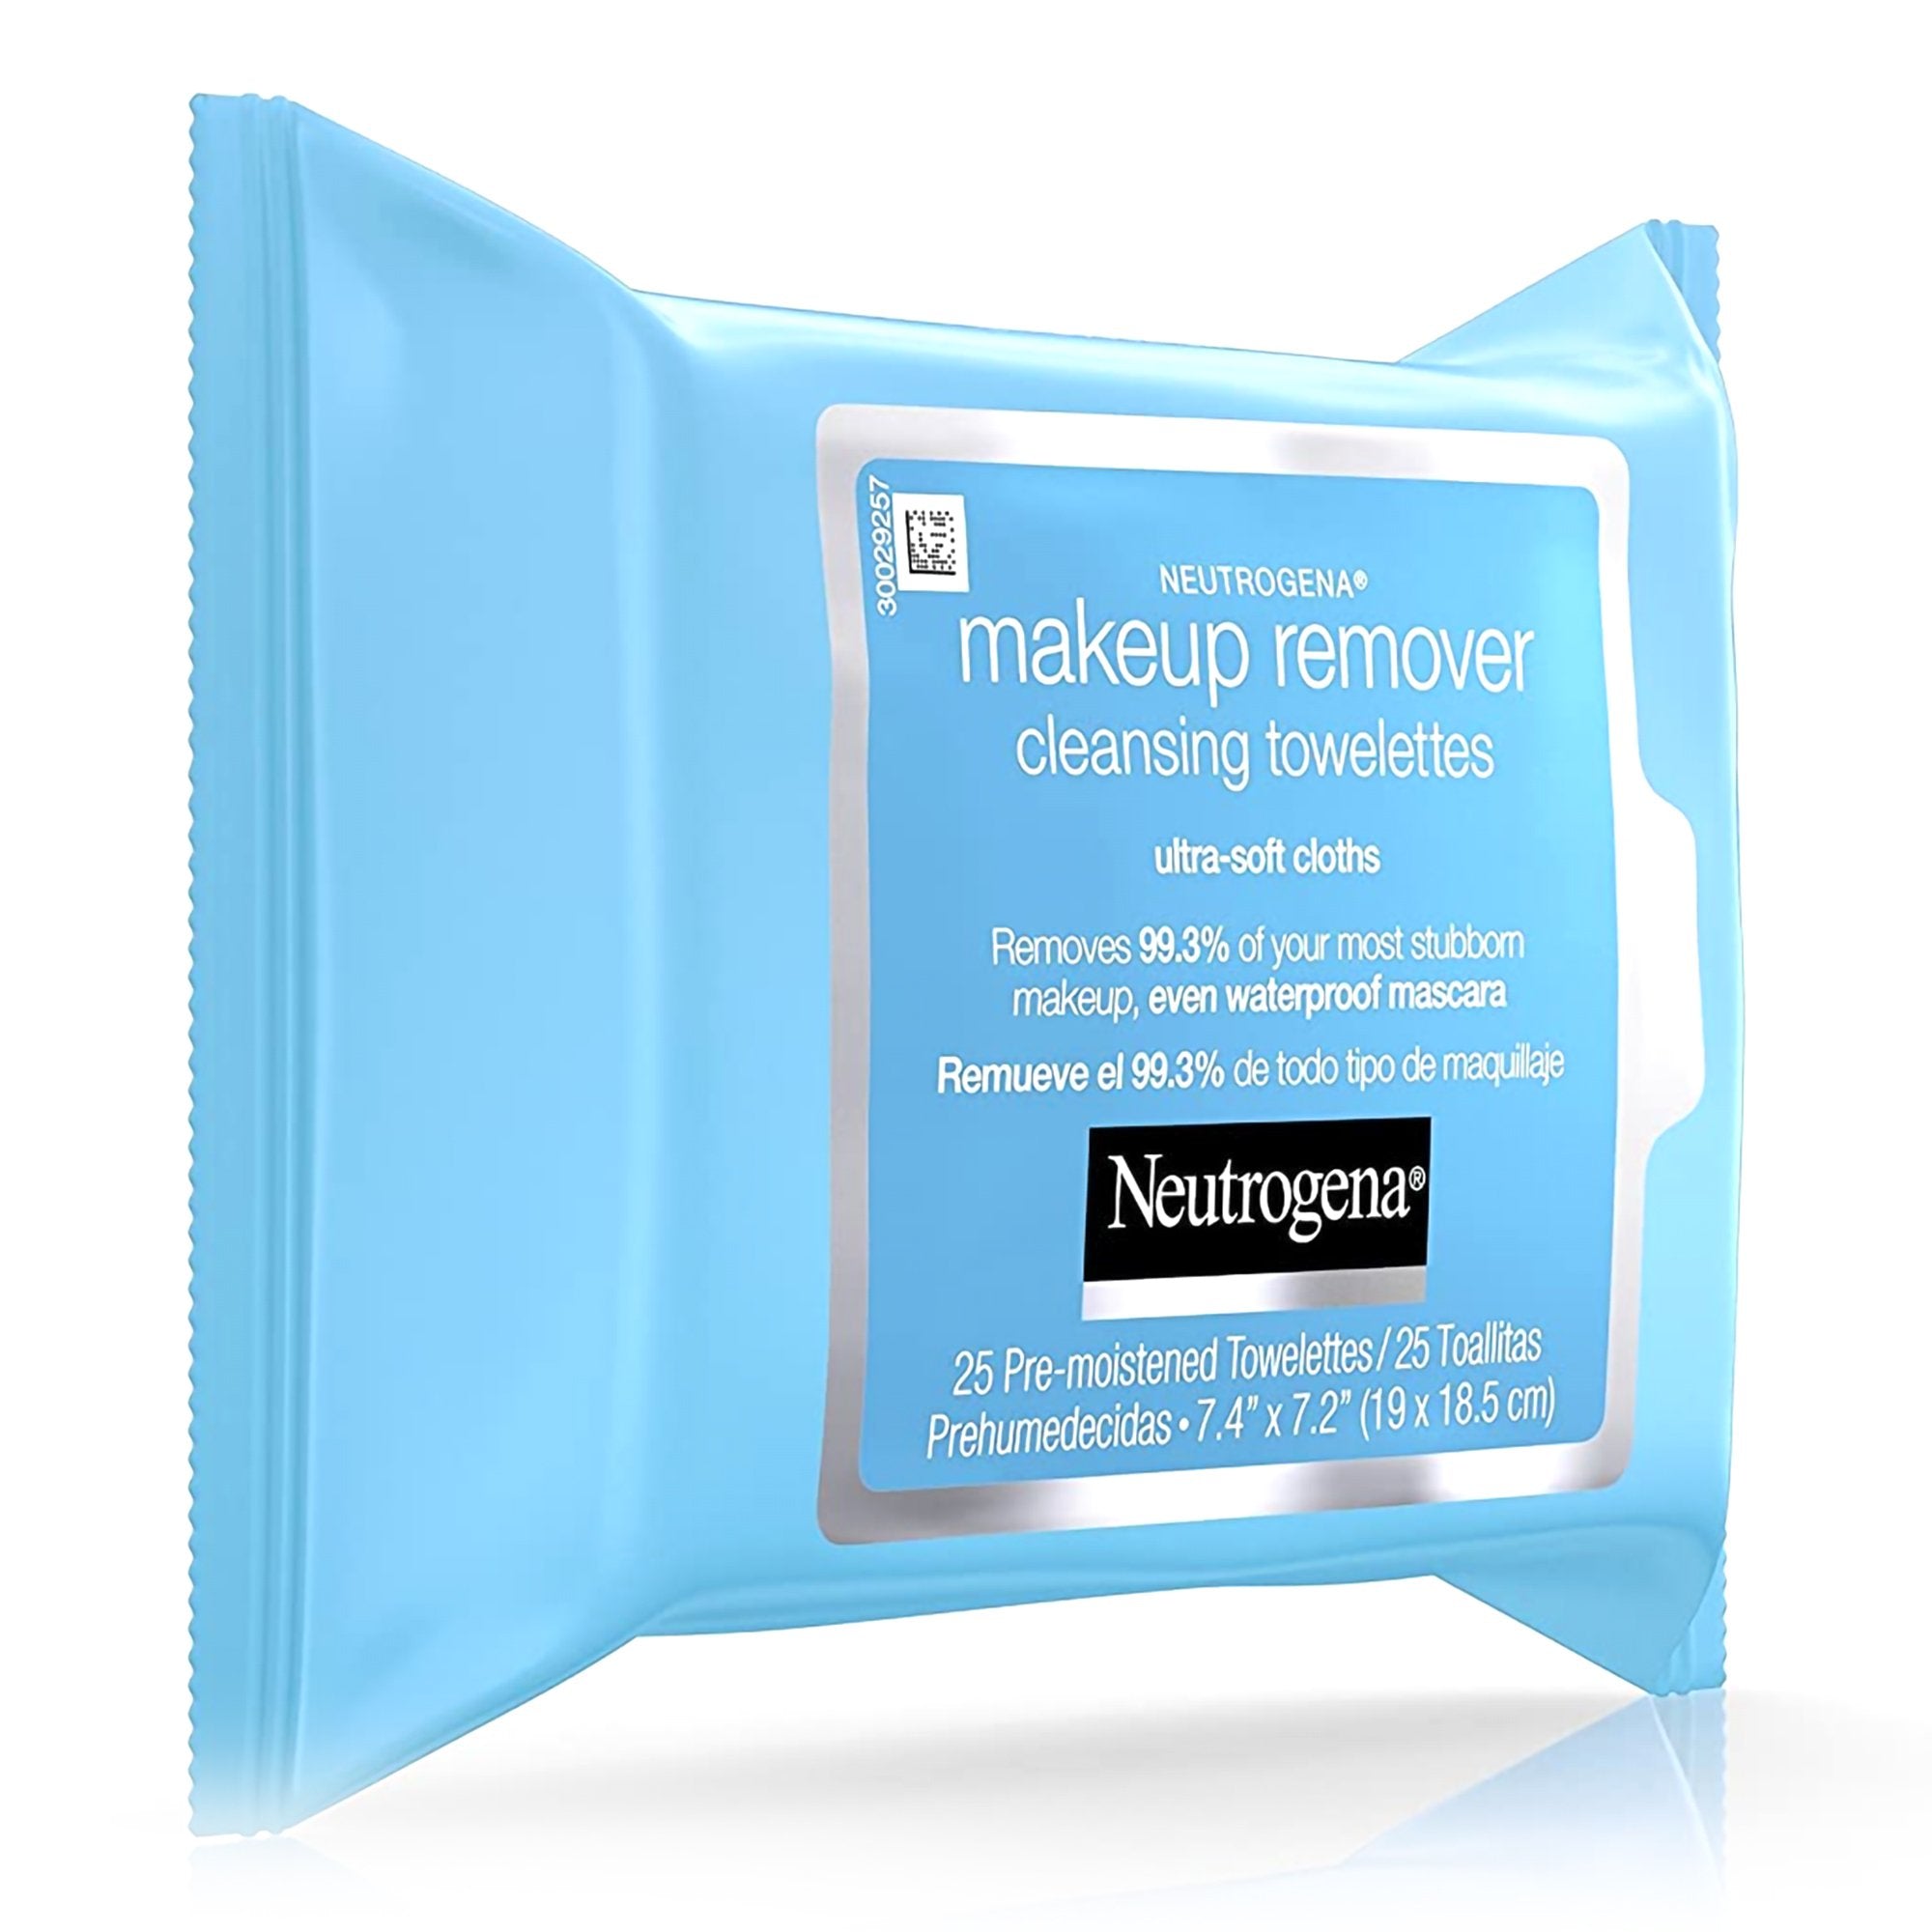 Makeup Remover Neutrogena Wipe 25 per Pack Soft Pack Scented